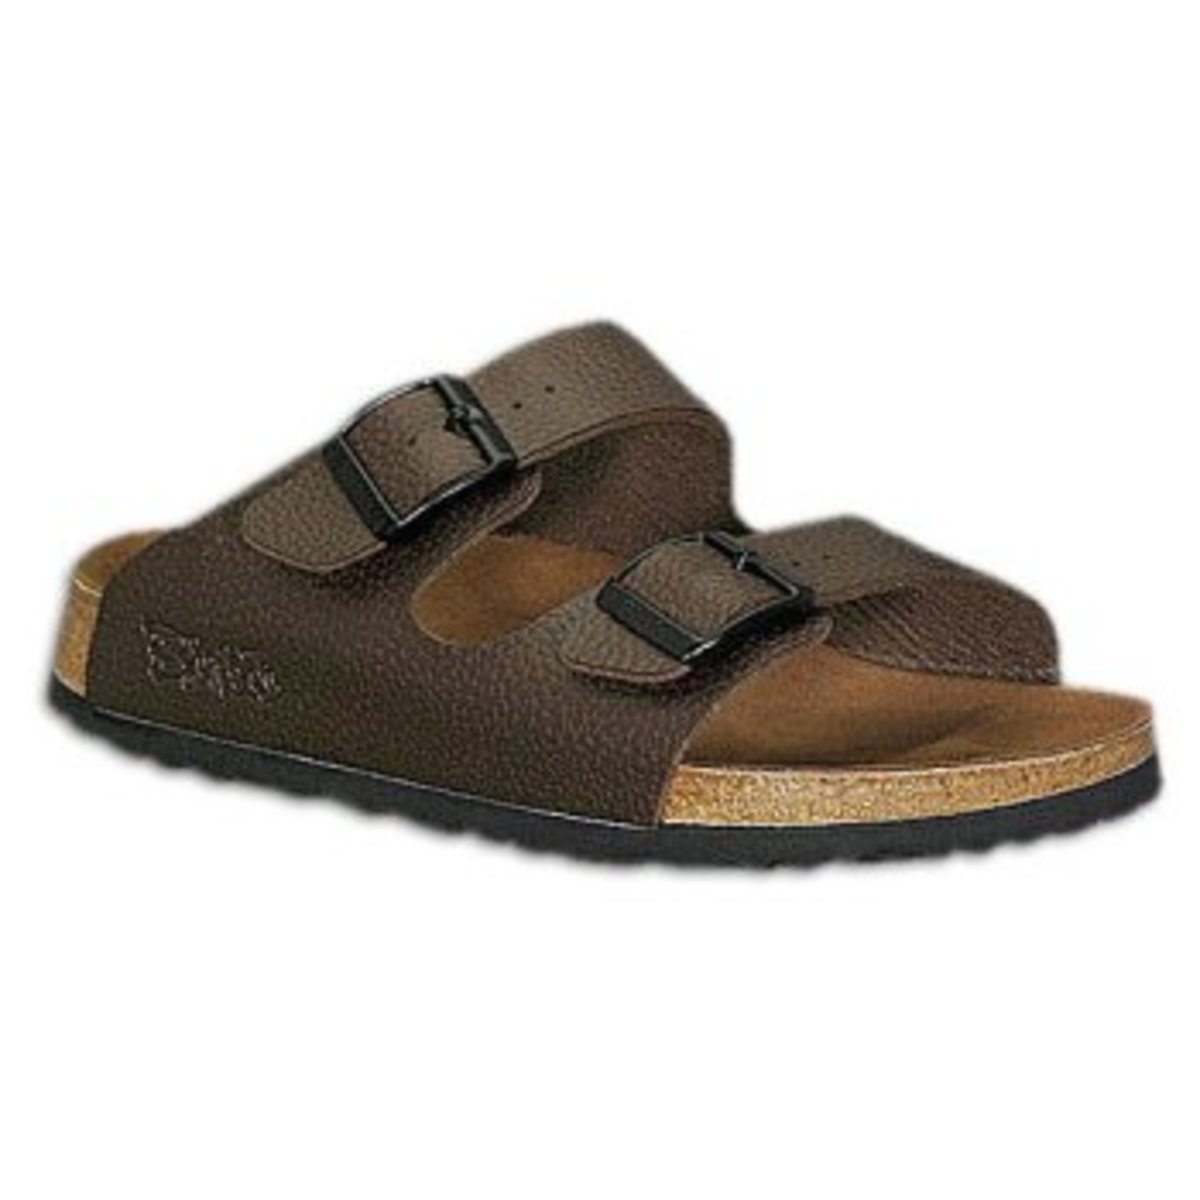 Perfect Sandals For Flat Feet 